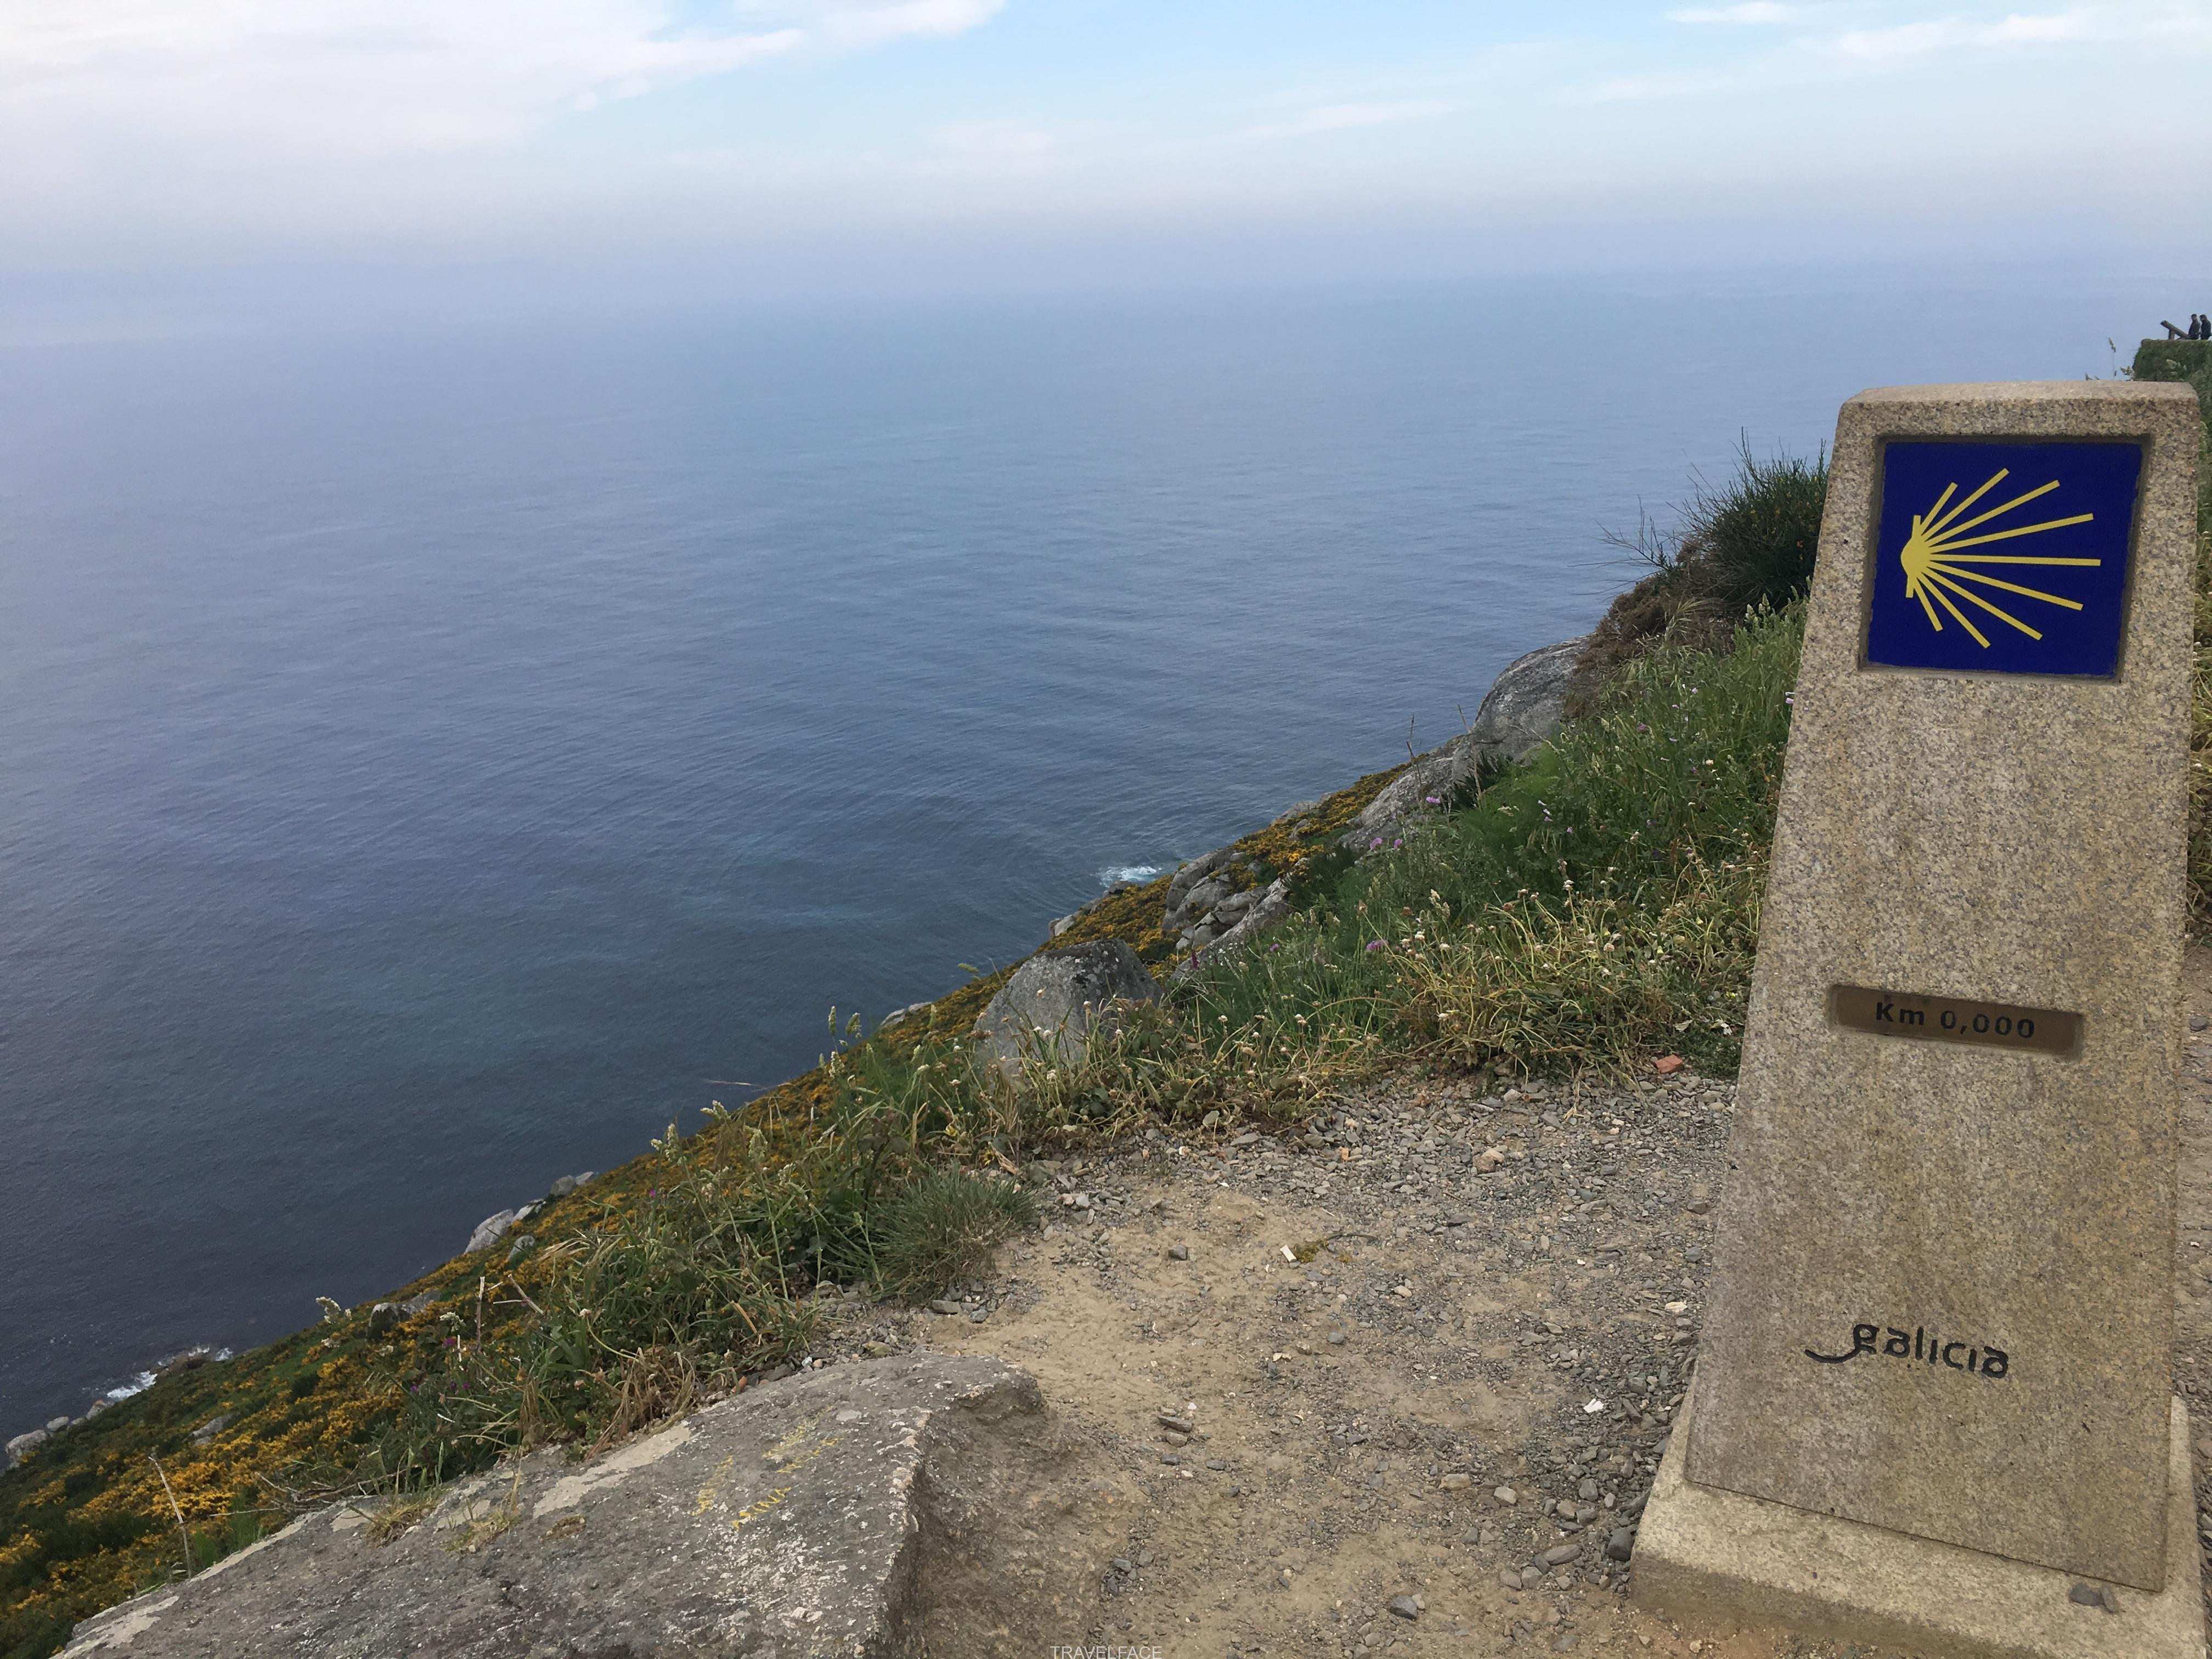 0km marker at the 'End of the World'